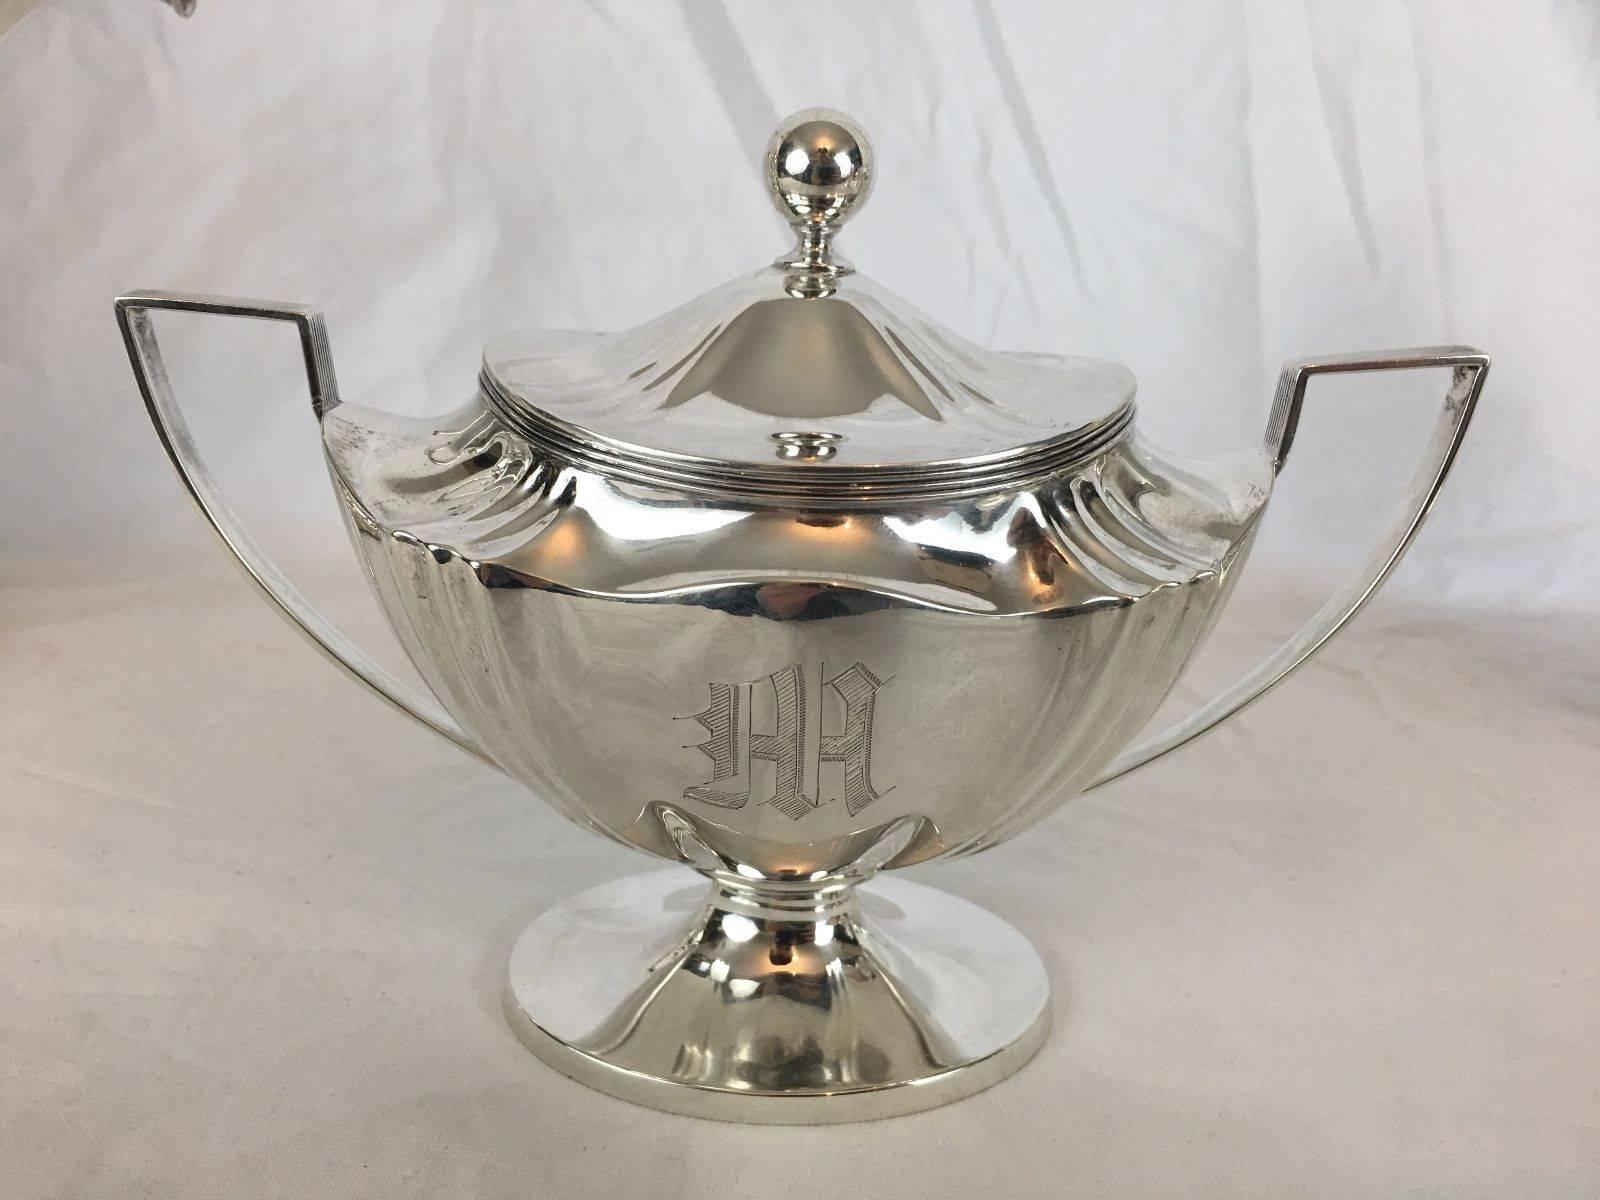 Whiting Manufacturing Co Tea & Coffee Service Sterling Silver, American 1